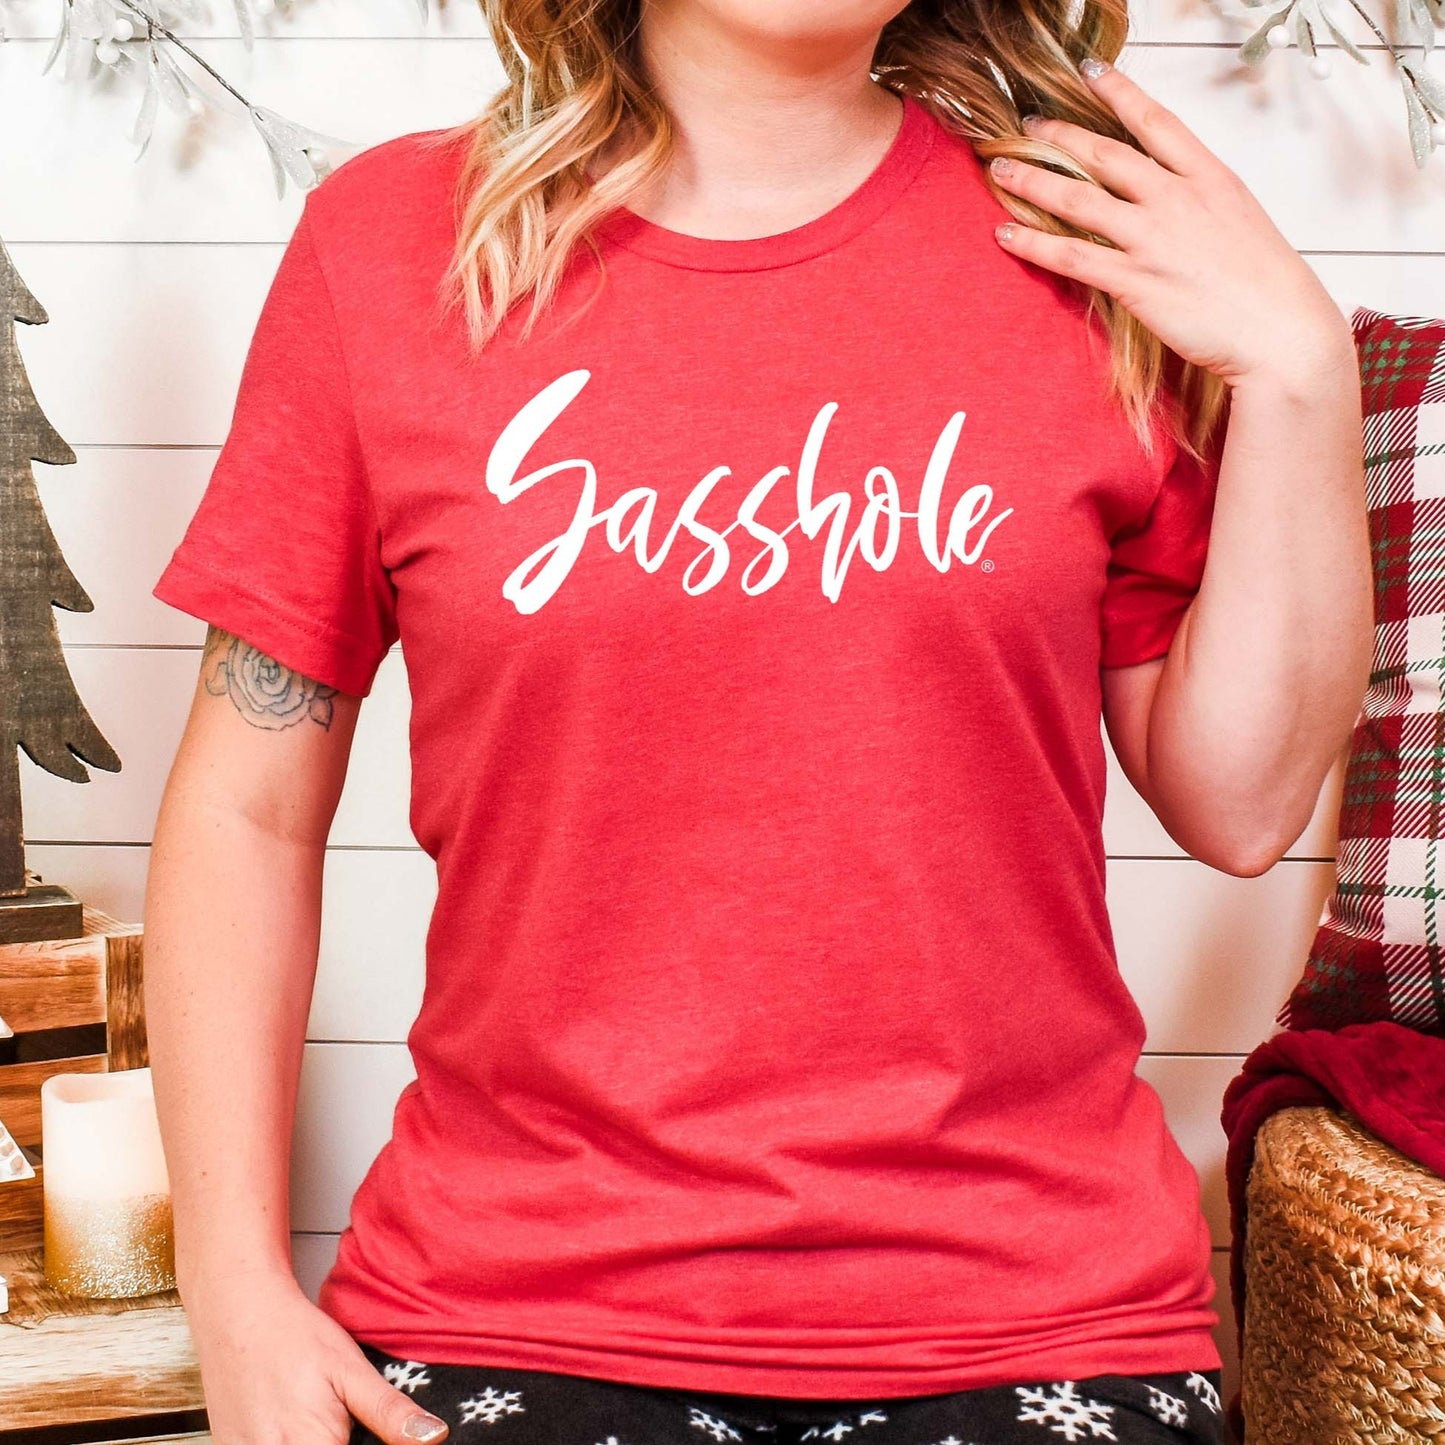 Sassy, Bold, and Unapologetic: Our Women's Sasshole® T-Shirt